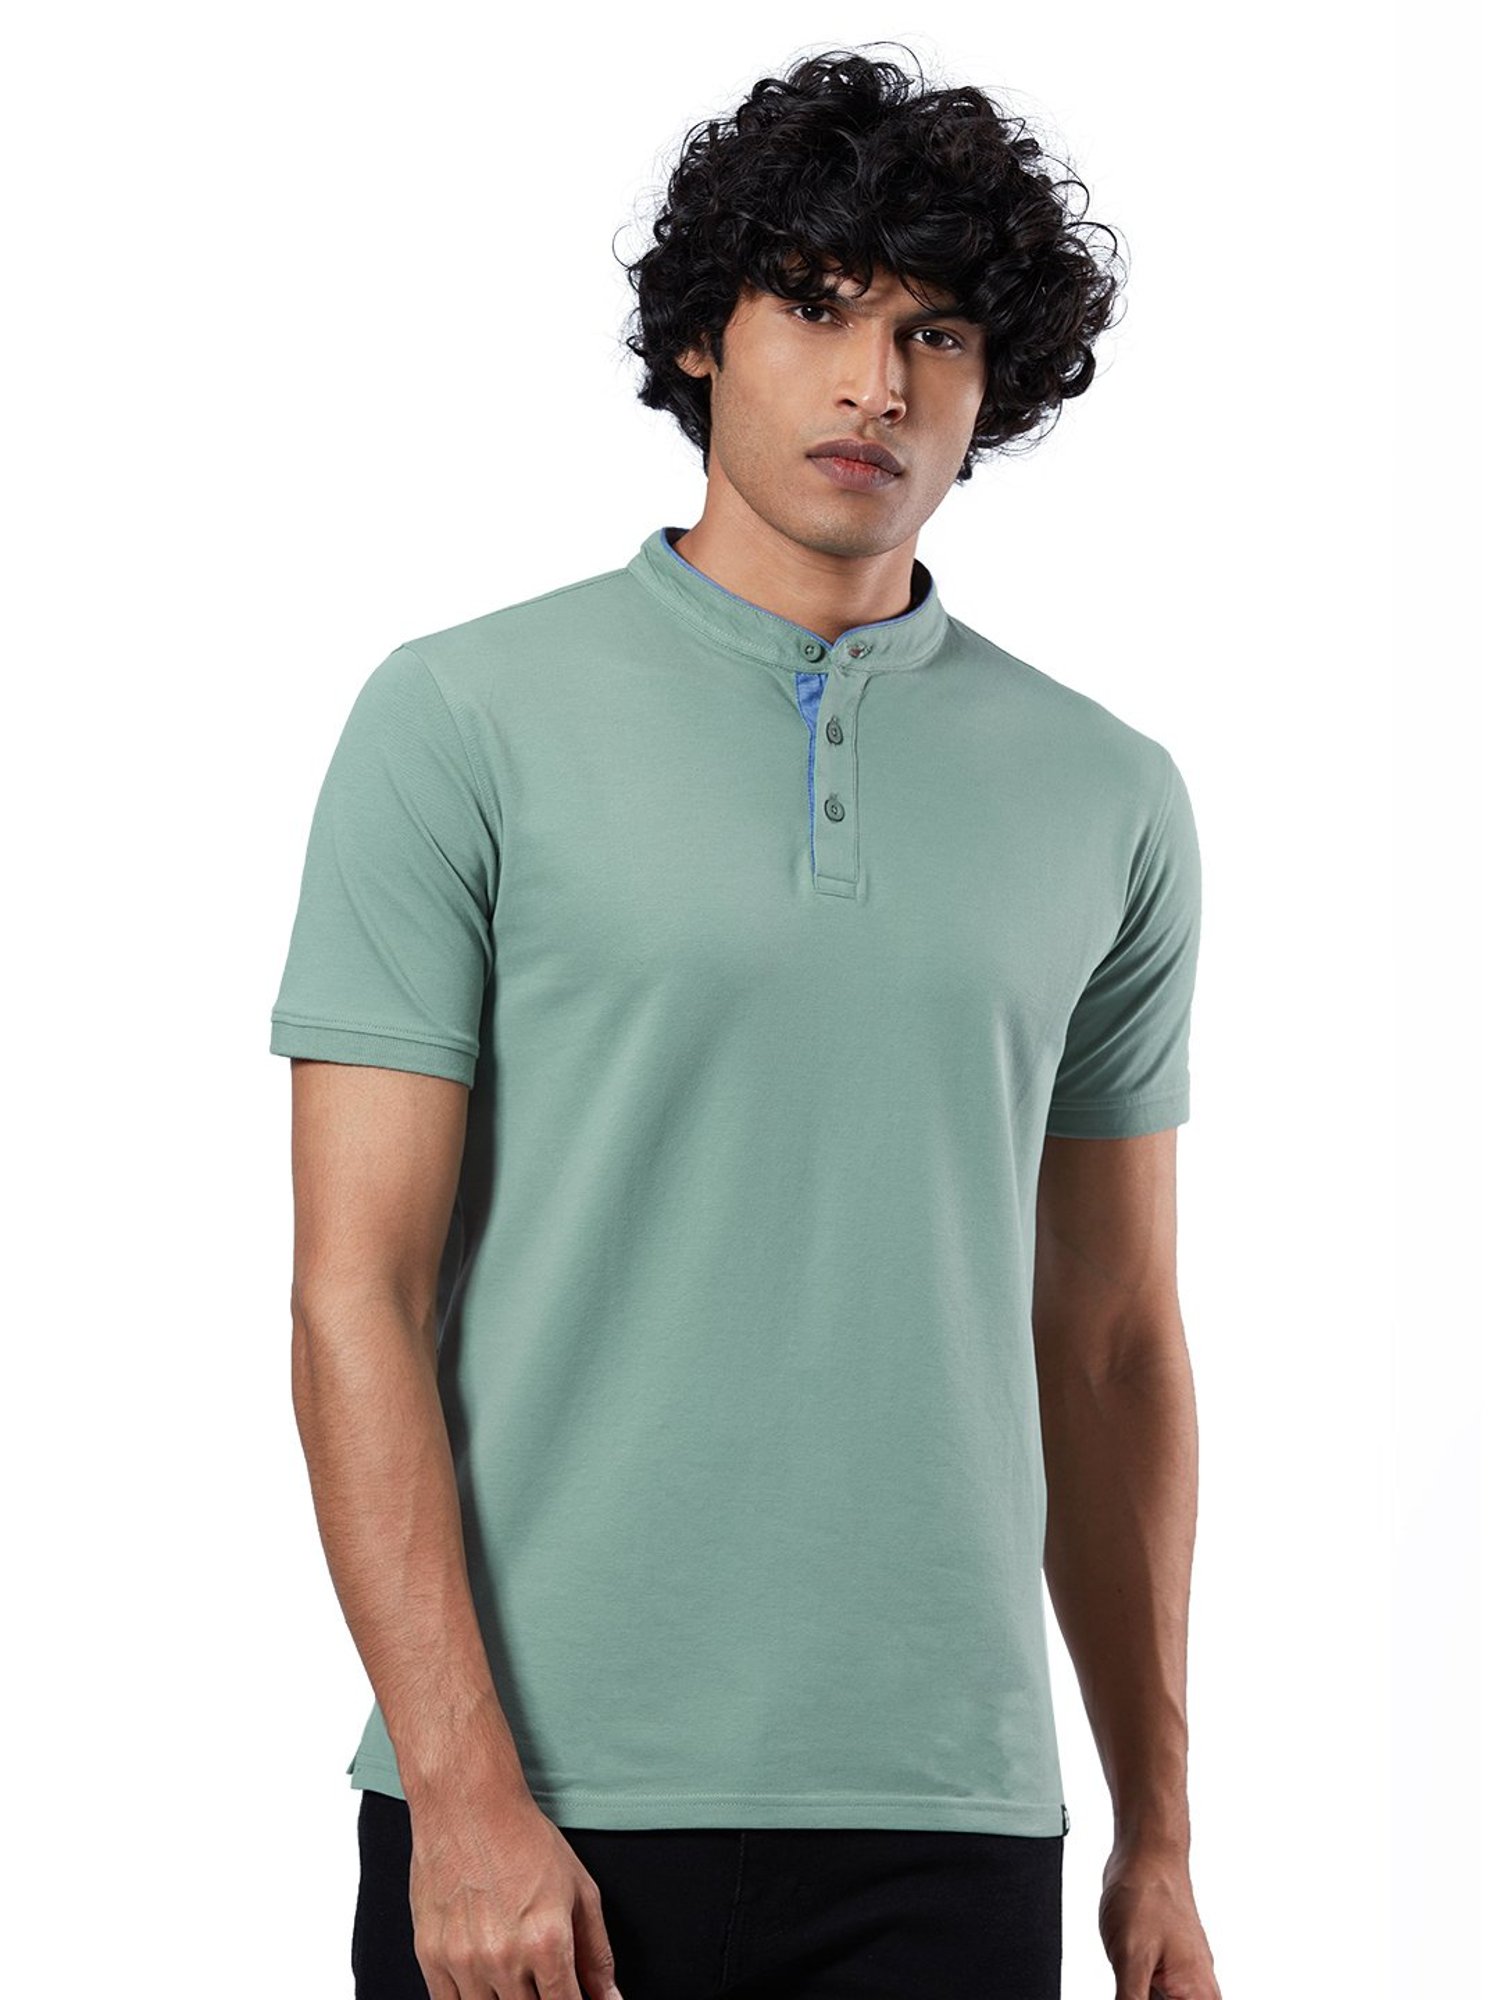 Buy The Souled Store Sage Green T-Shirt for Men's Online @ Tata CLiQ